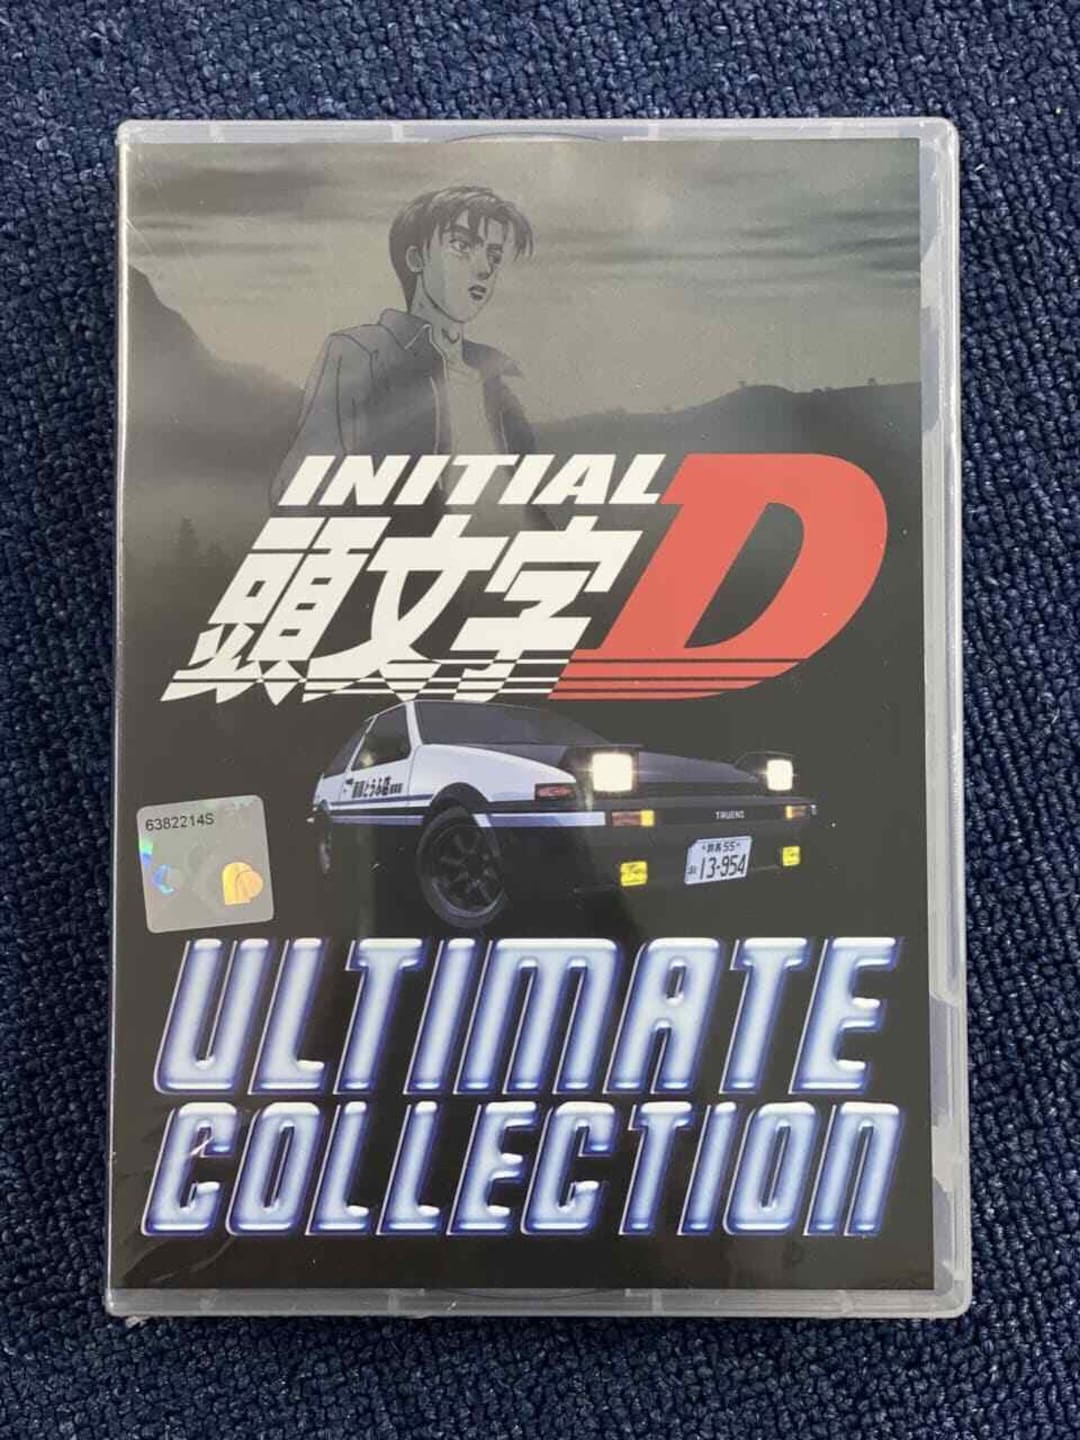 DVD Anime INITIAL D Stage 1-6 + 2 Movie + 2 OST All Region English Subtitle